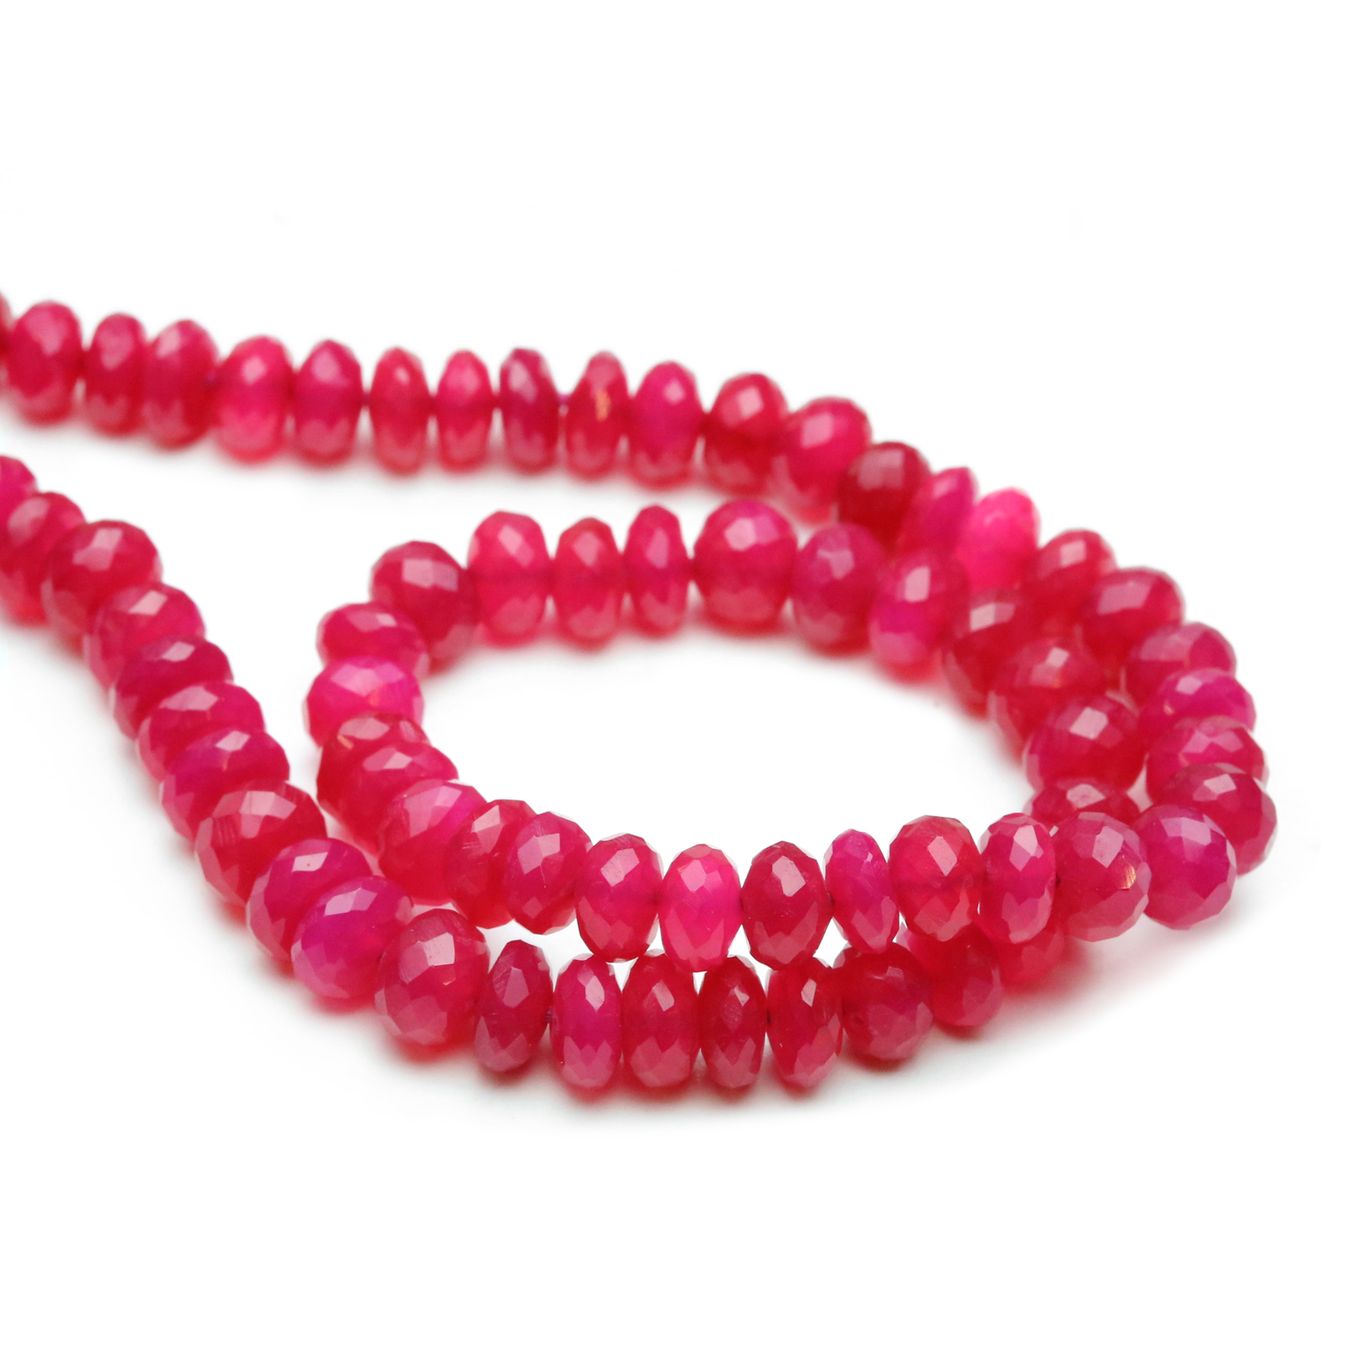 Fuchsia Pink Chalcedony Faceted Rondelle Beads - Approx From 6x4mm